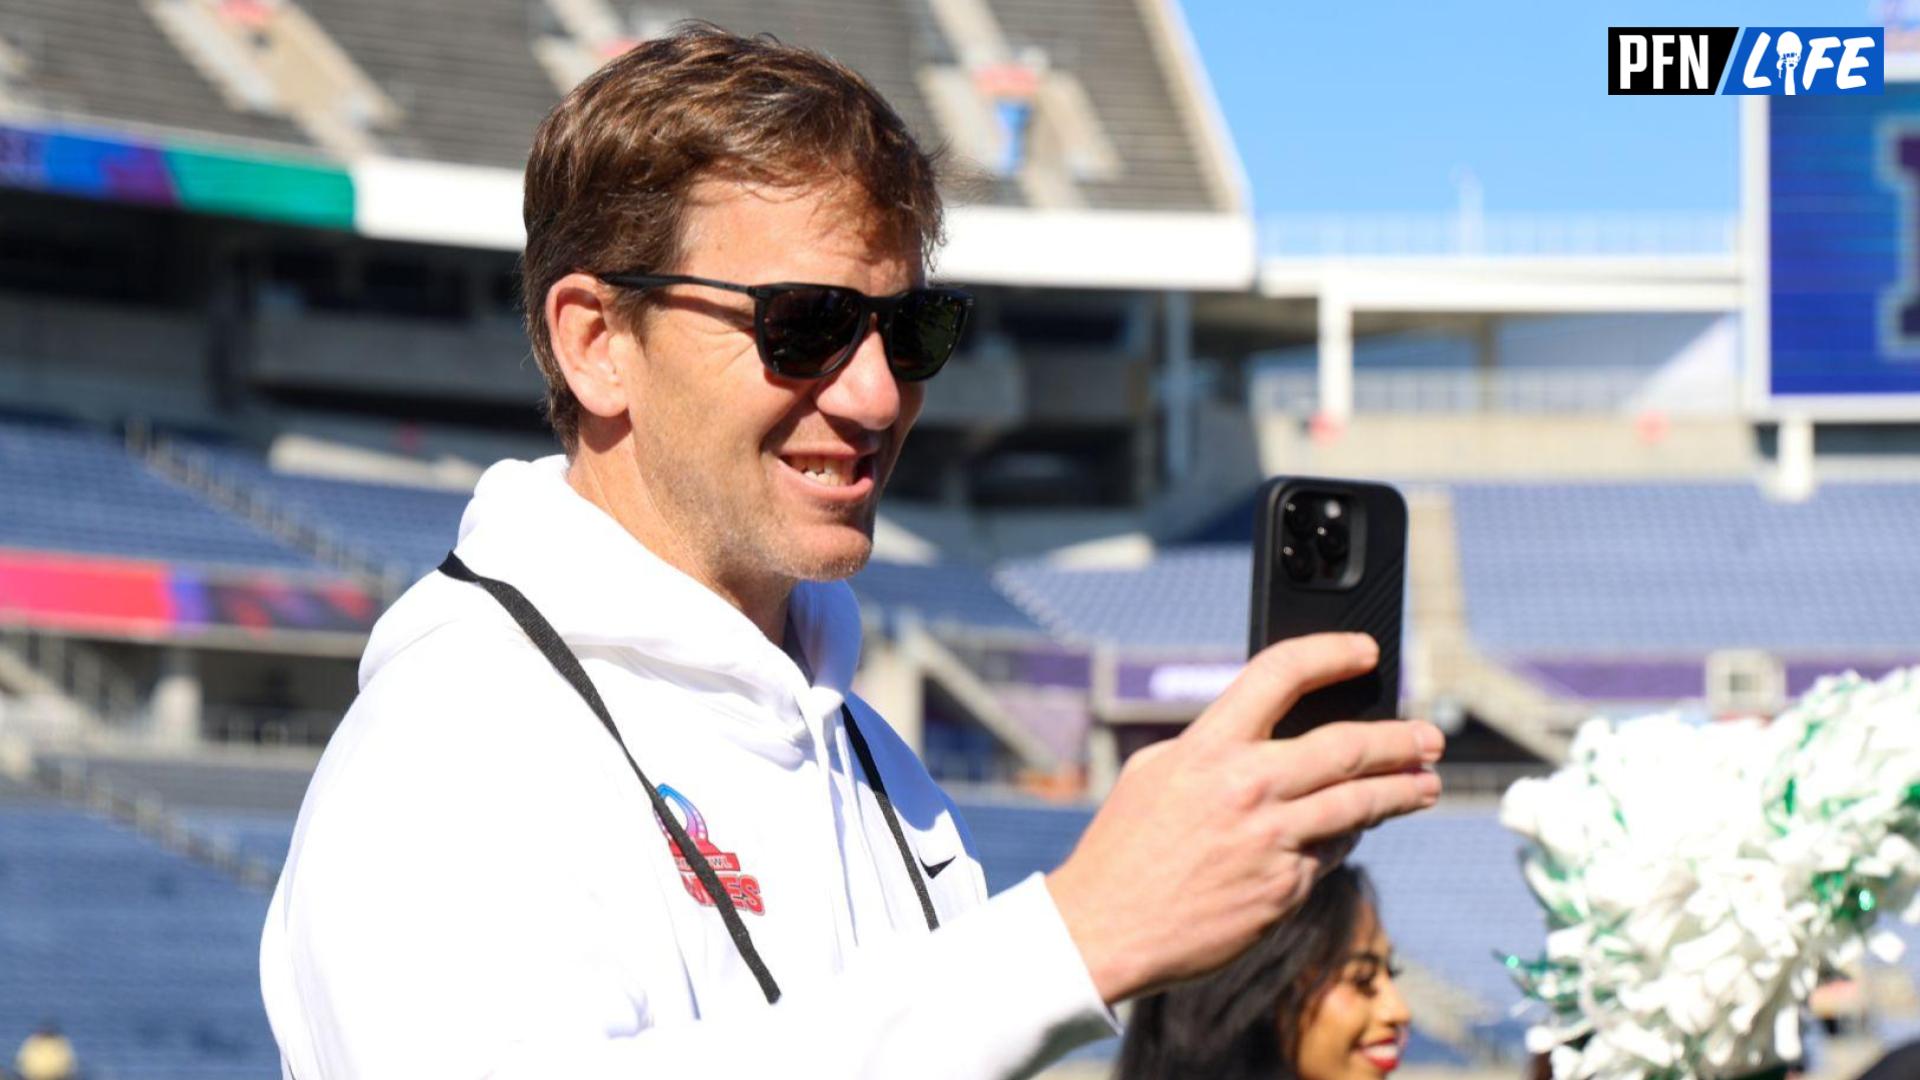 NFC head coach Eli Manning participates in the AFC versus NFC Pro Bowl practice and media day at Camping World Stadium.